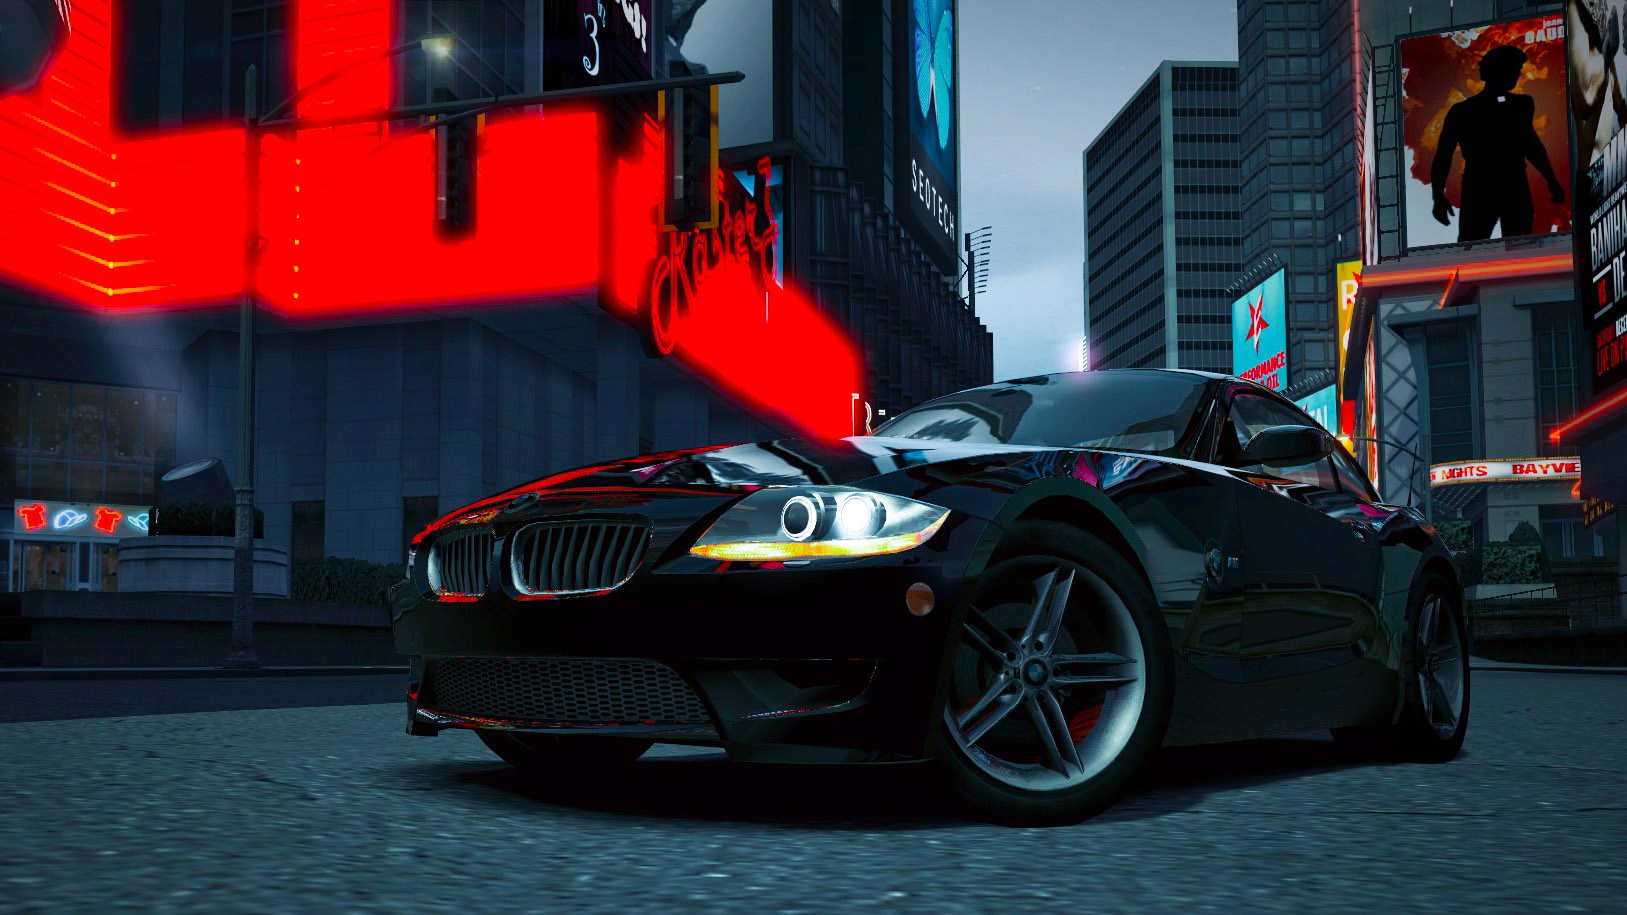 https://static.wikia.nocookie.net/nfsworldinfo/images/f/fb/CarRelease_BMW_Z4_M_Coupe_Black_2.jpg/revision/latest?cb=20131031020026